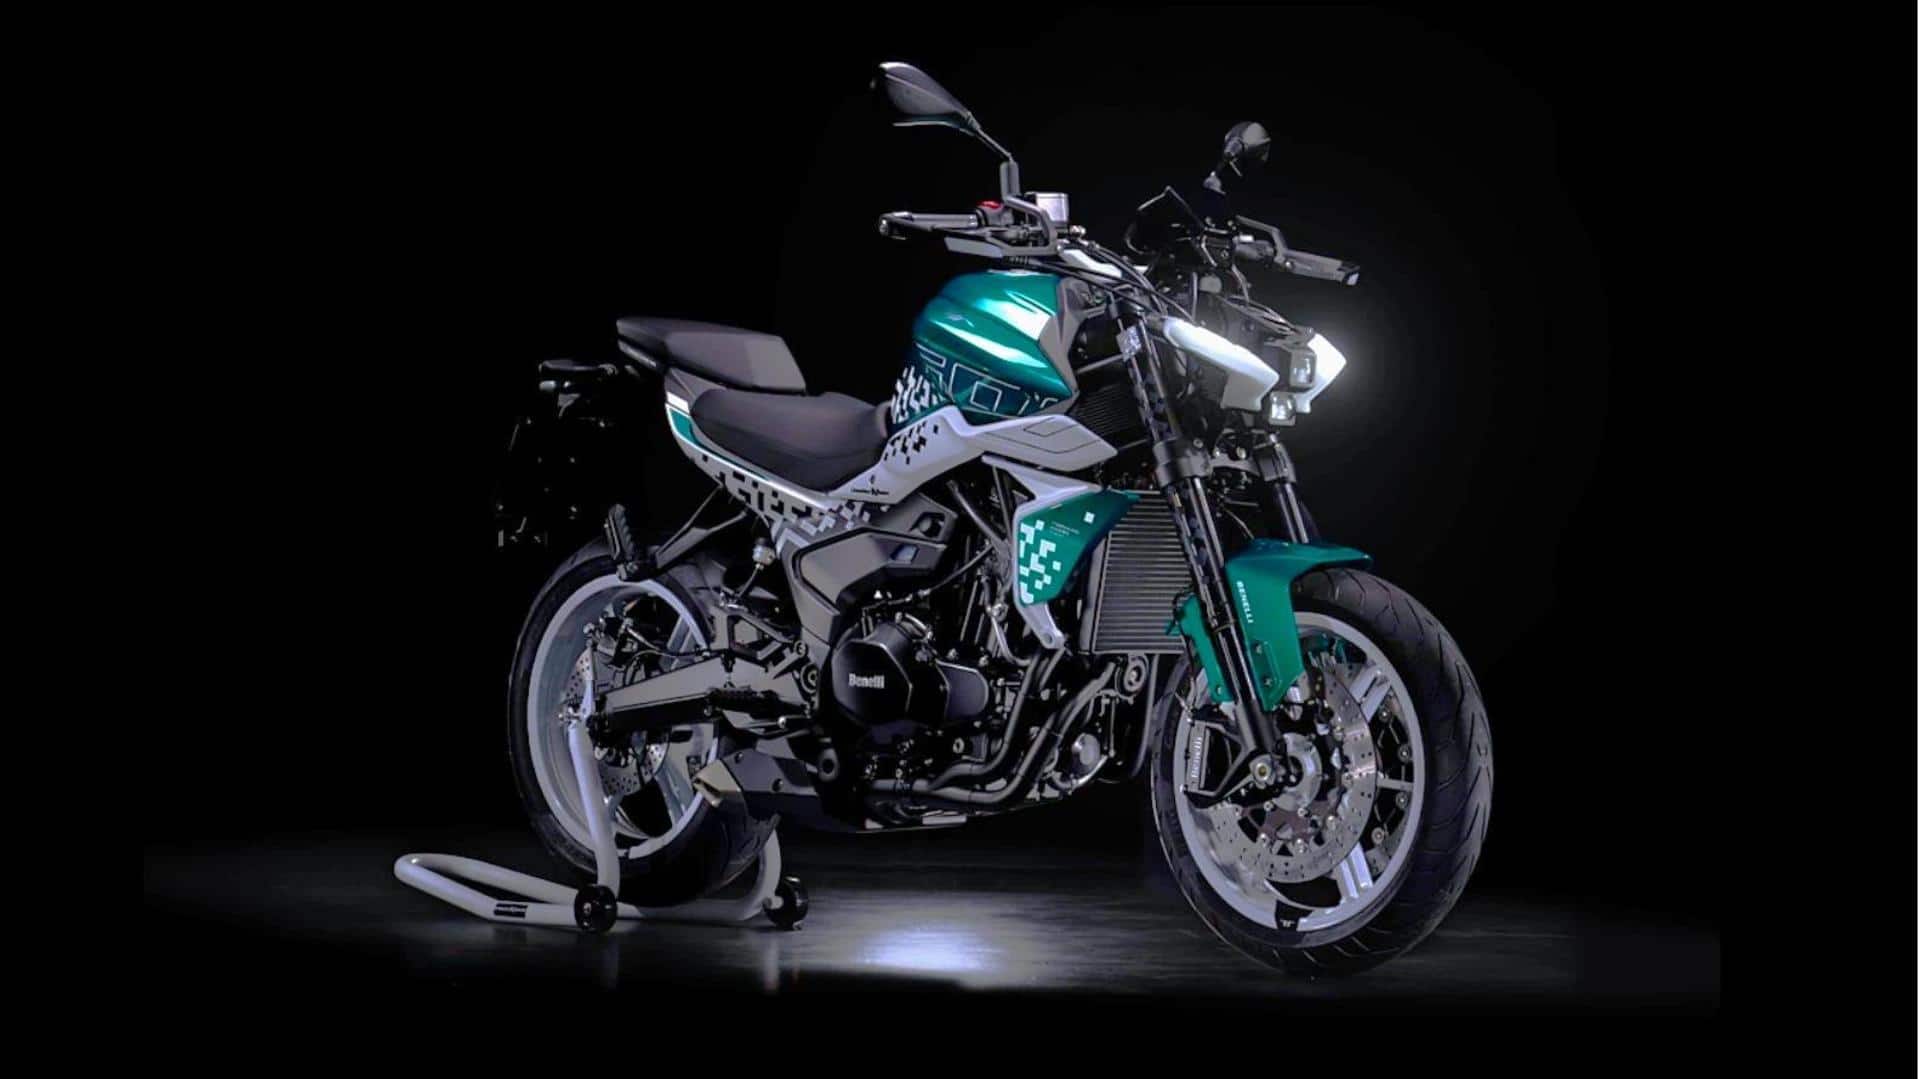 2023 Benelli Tornado Naked Twin 500 unveiled: Check design, features